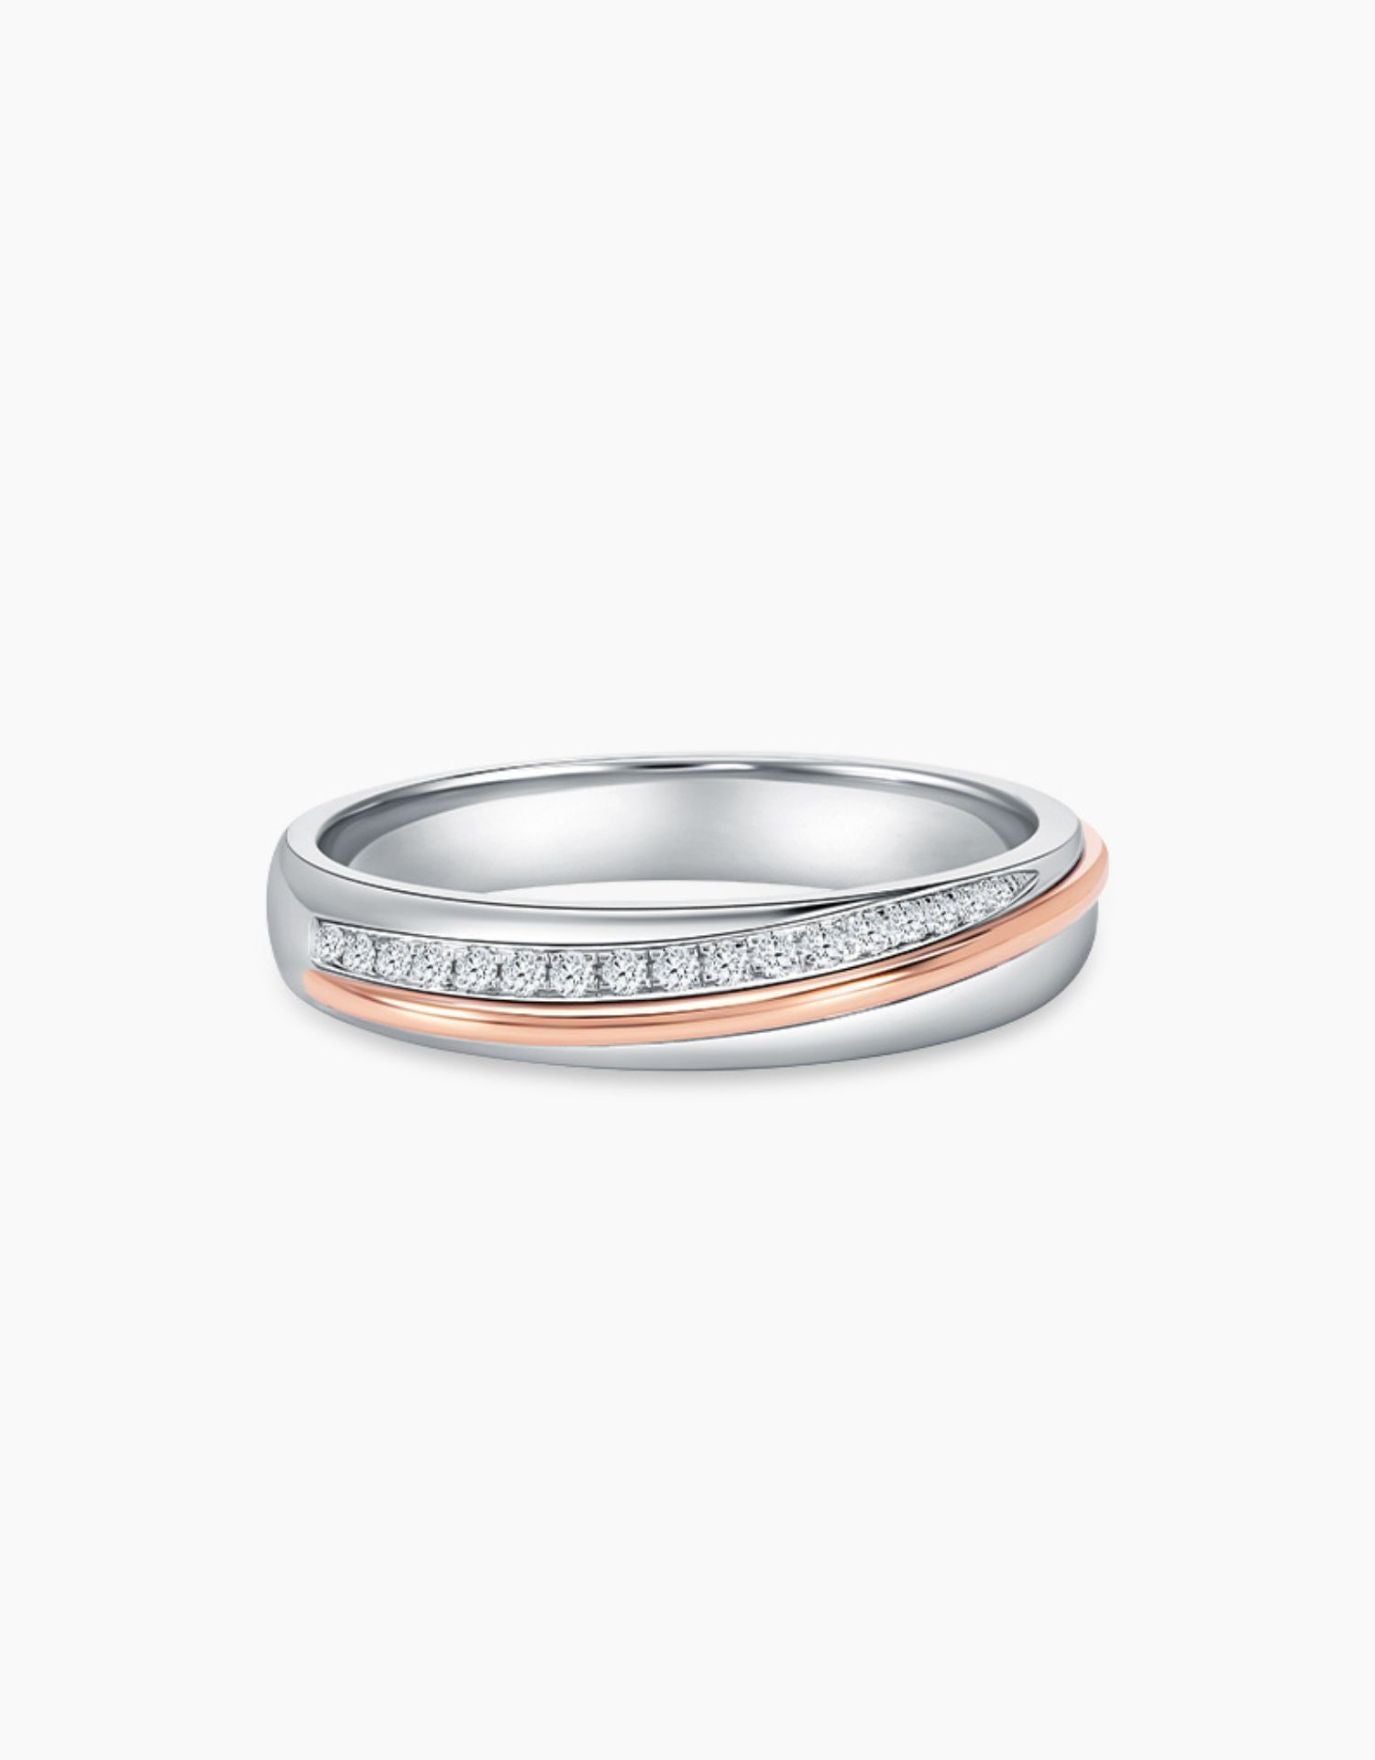 LVC Perfection Joy Wedding Bands in White and Rose Gold with Diamonds